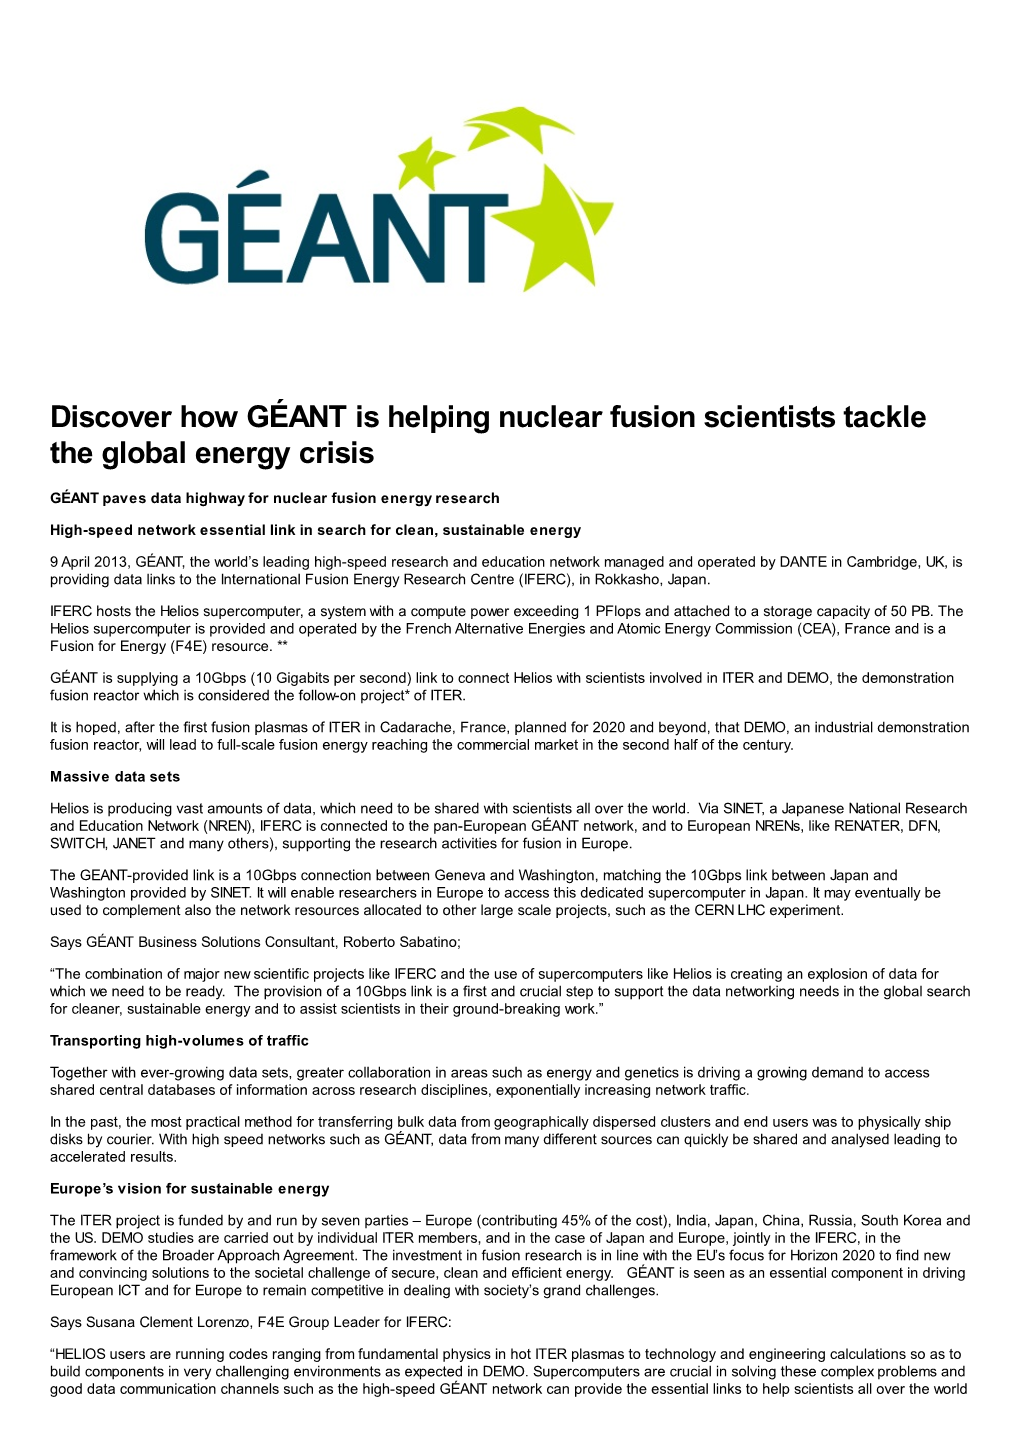 Discover How GÉANT Is Helping Nuclear Fusion Scientists Tackle the Global Energy Crisis